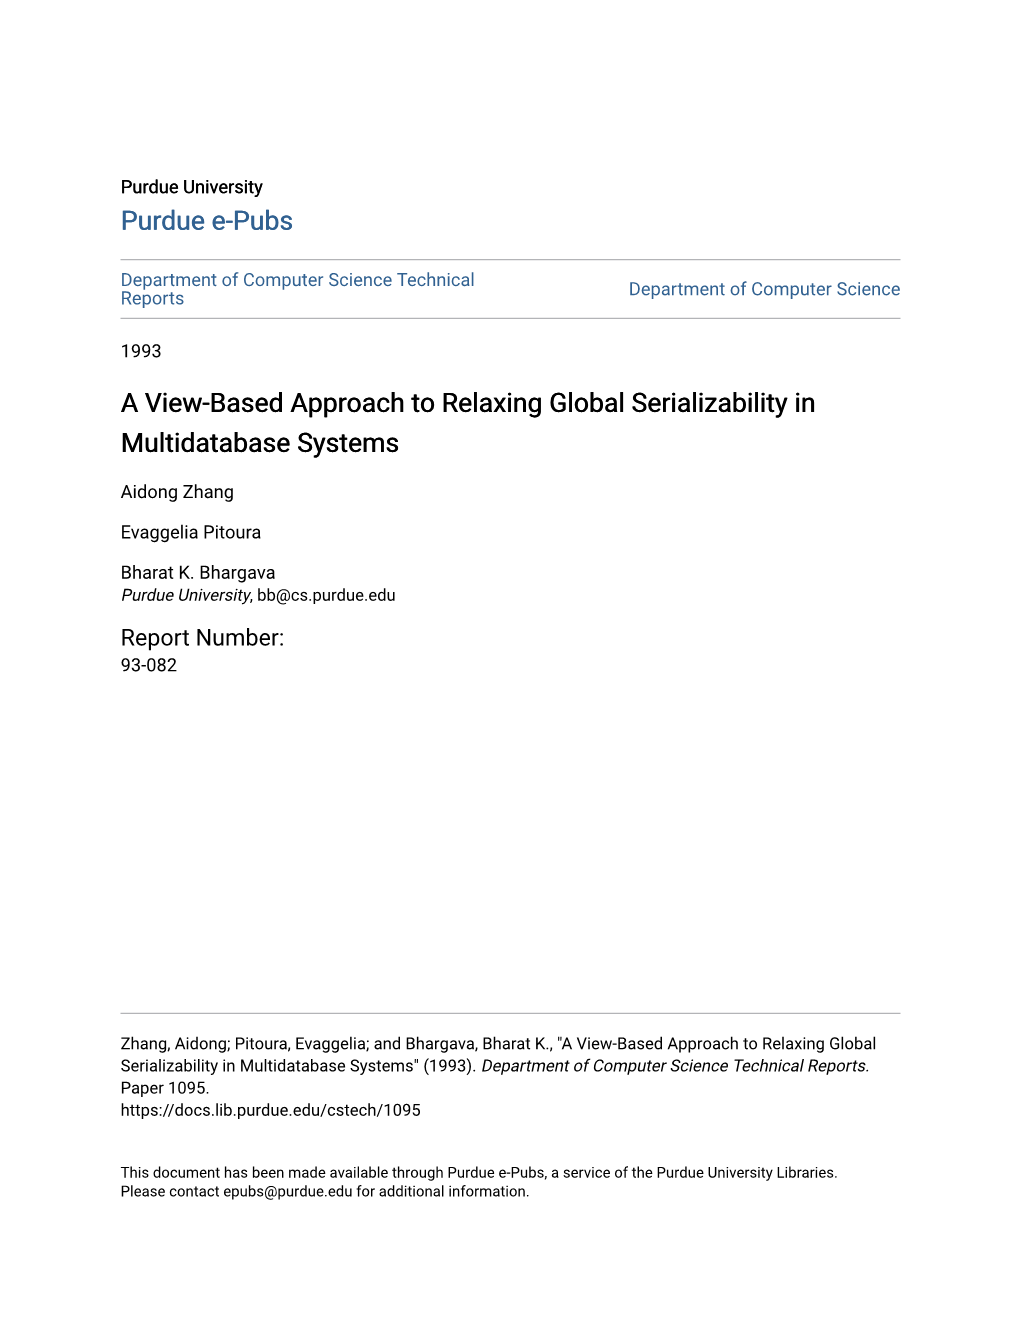 A View-Based Approach to Relaxing Global Serializability in Multidatabase Systems